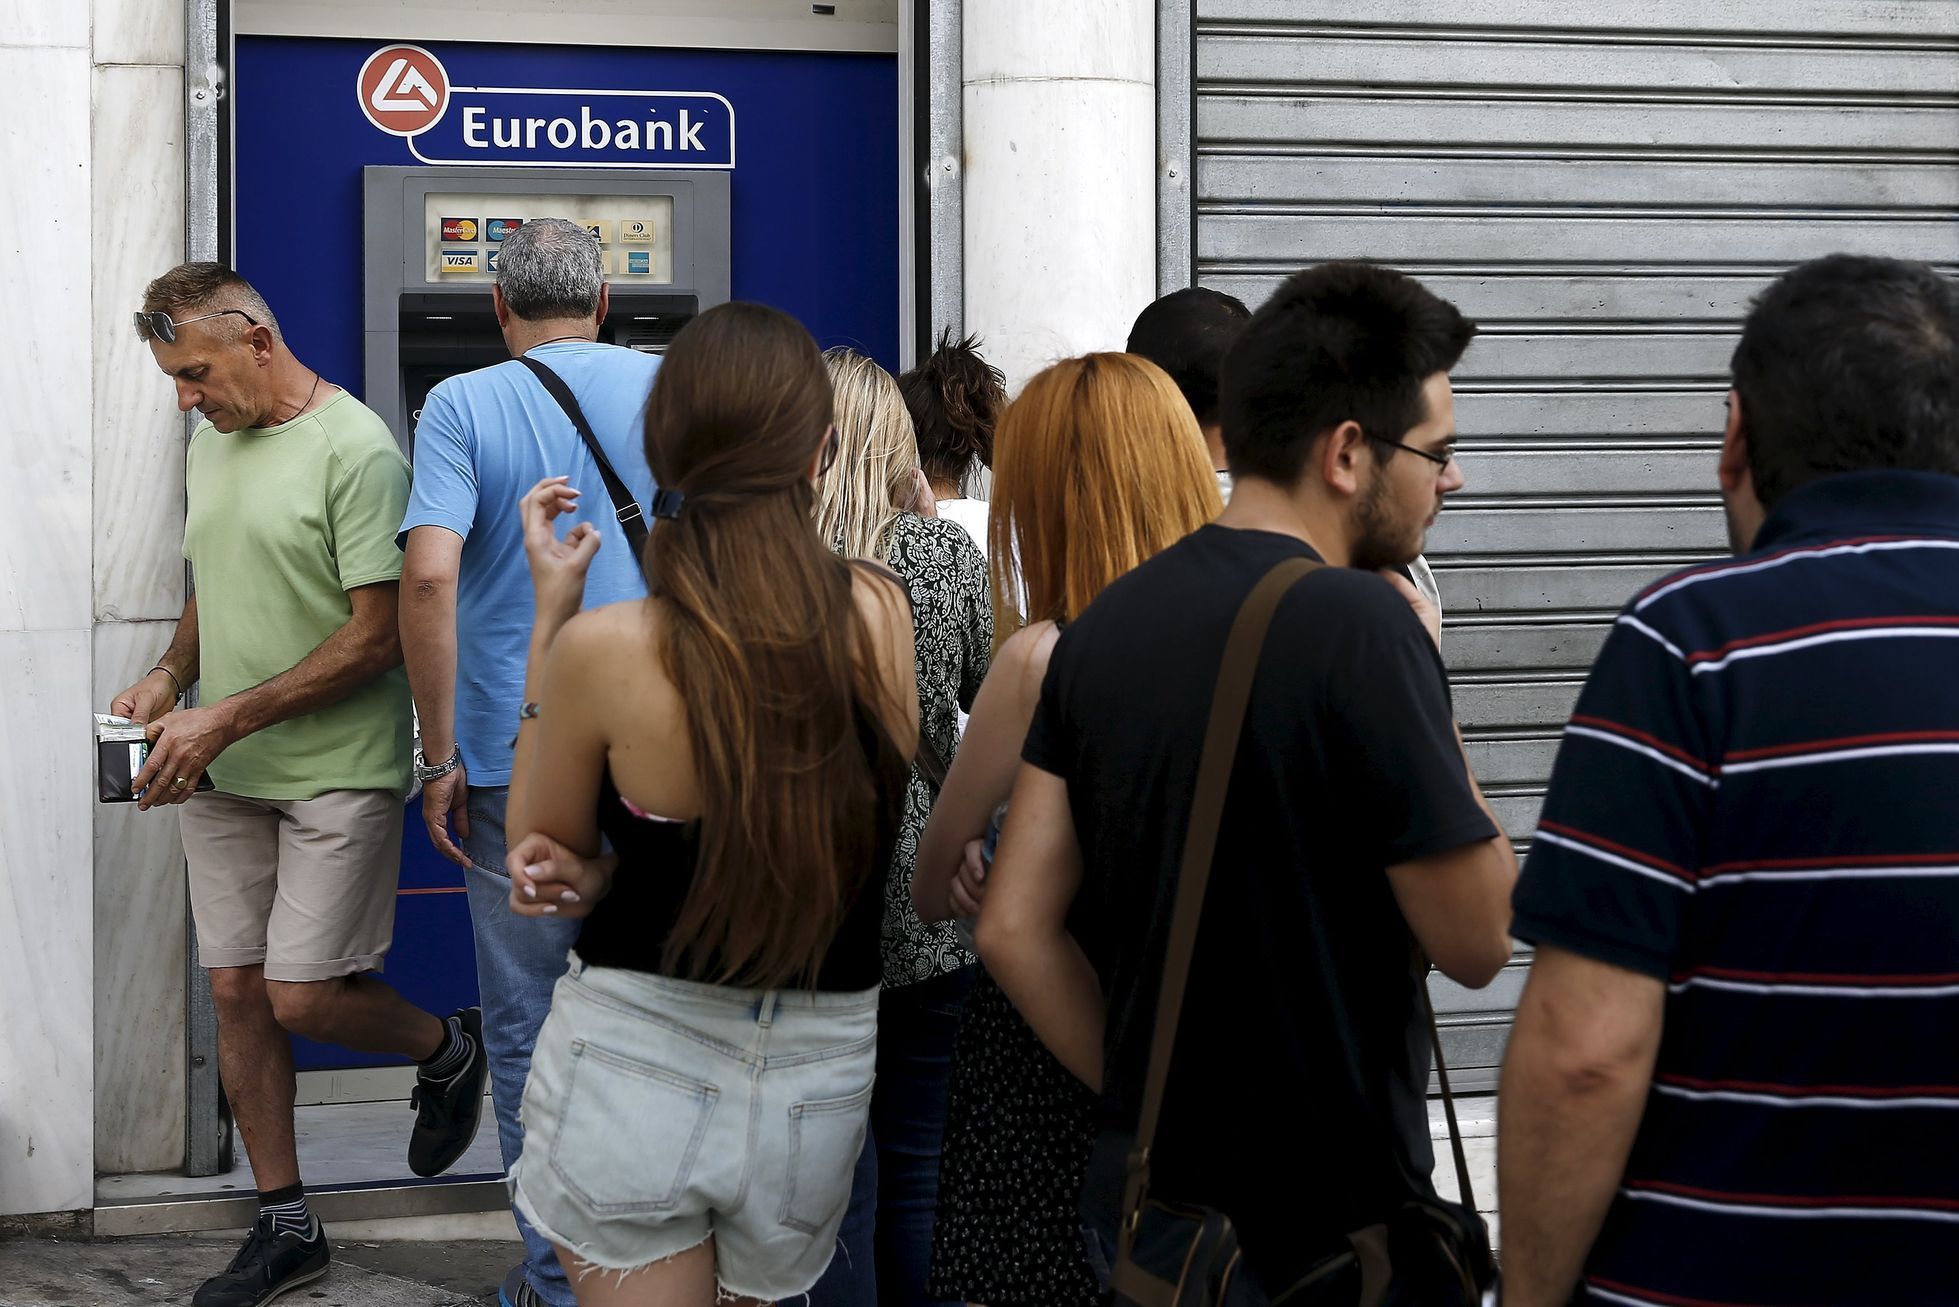 A man puts money in his wallet as people line up to withdraw cash from an ATM outside a Eurobank branch in Athens